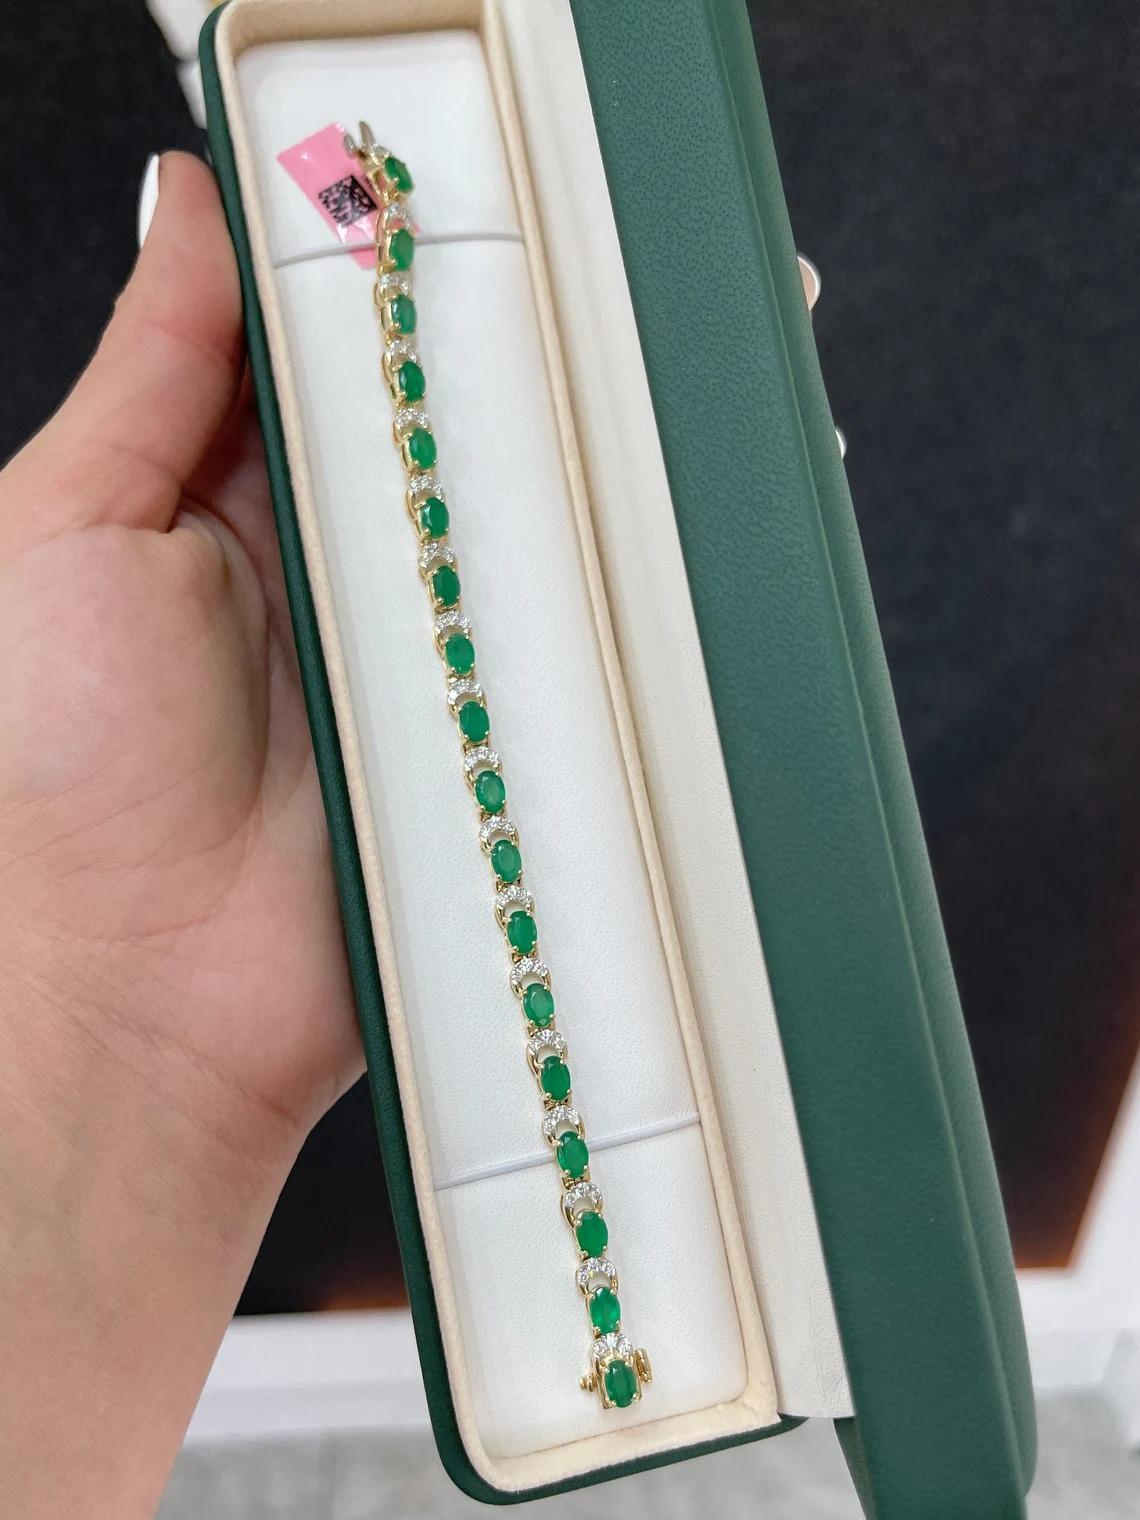 A gorgeous emerald and diamond bracelet. This remarkable piece features almost ten full carats of natural emeralds and diamonds. Eight carats of beautiful, lush, rich, dark green emeralds cut into the shape of an oval and showcase very good luster